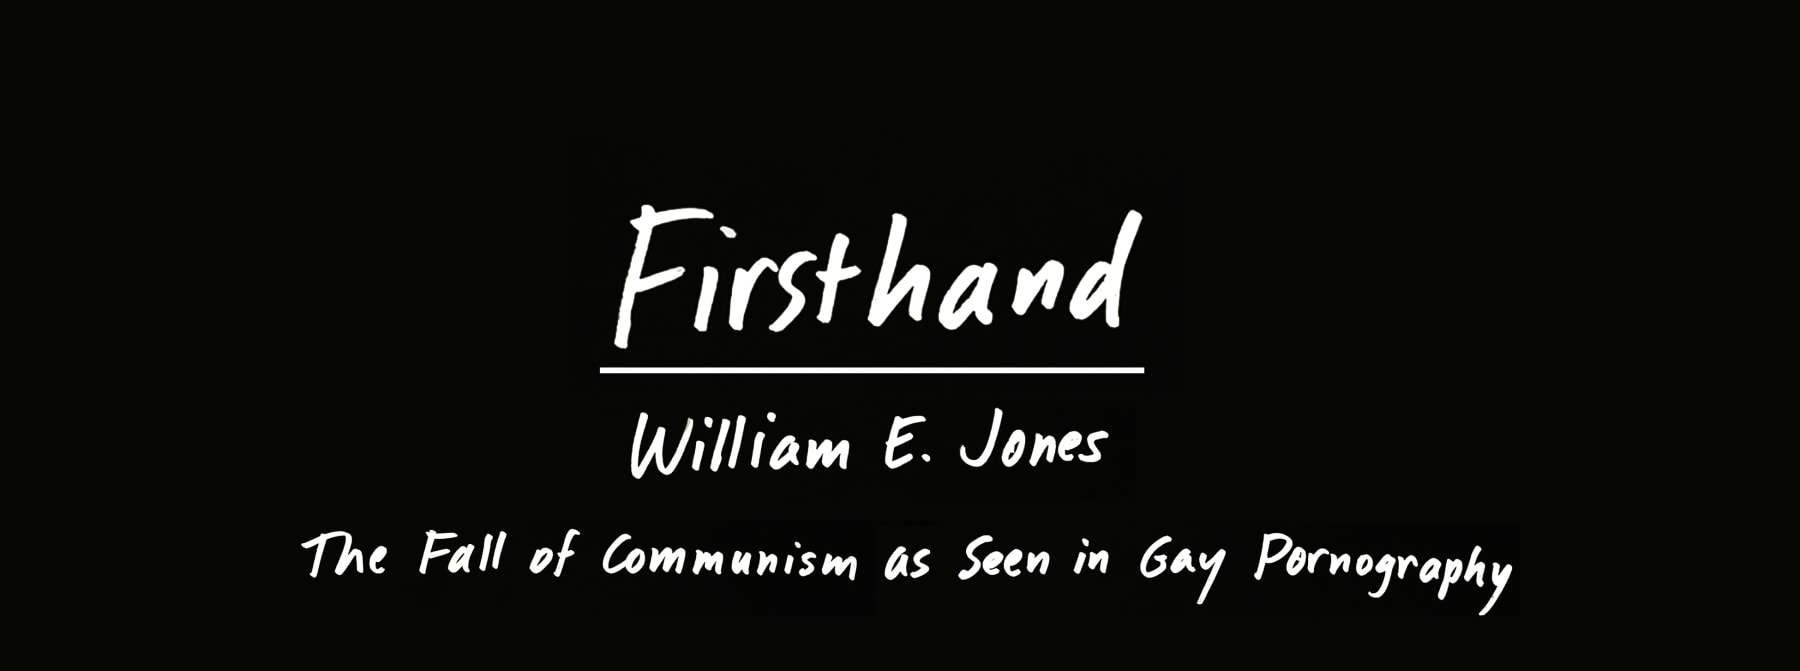 Firsthand: William E. Jones - The Fall of Communism as Seen in Gay Pornography - 线上展厅 - David Kordansky Gallery